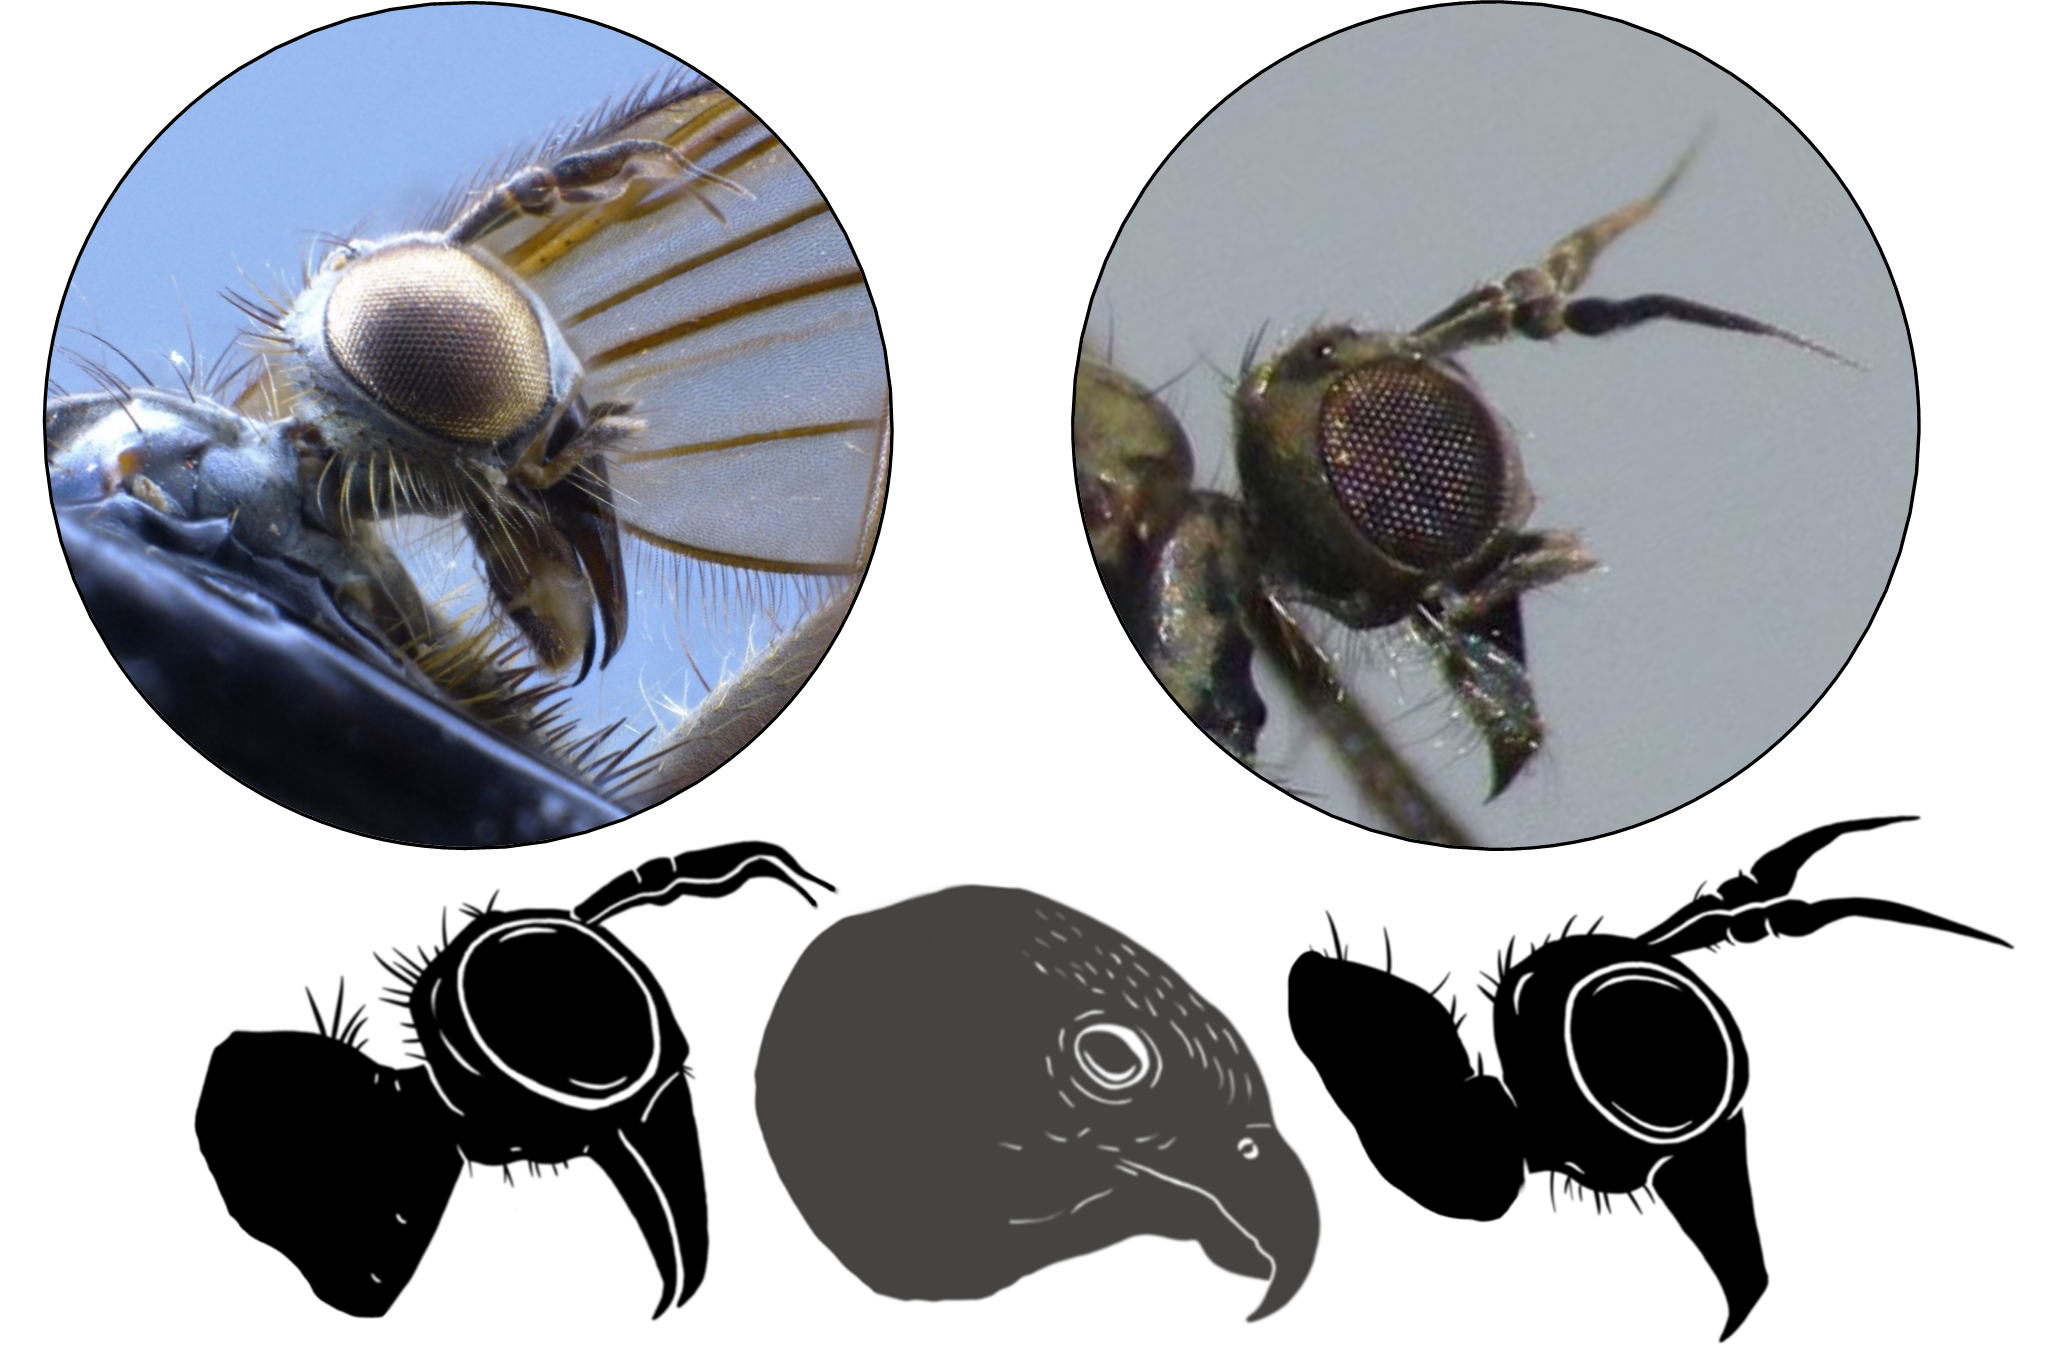 Empidids (dance flies) with beak-like mouthparts, Hydropeza longipennae (left, Canterbury Museum 2007.209.1), Hydropeza vockerothi (right, photo by Steve Kerr) with their silhouettes next to a Kārearea (New Zealand Falcon) to show the similarities in form (centre). Drawings by Morgane Merien